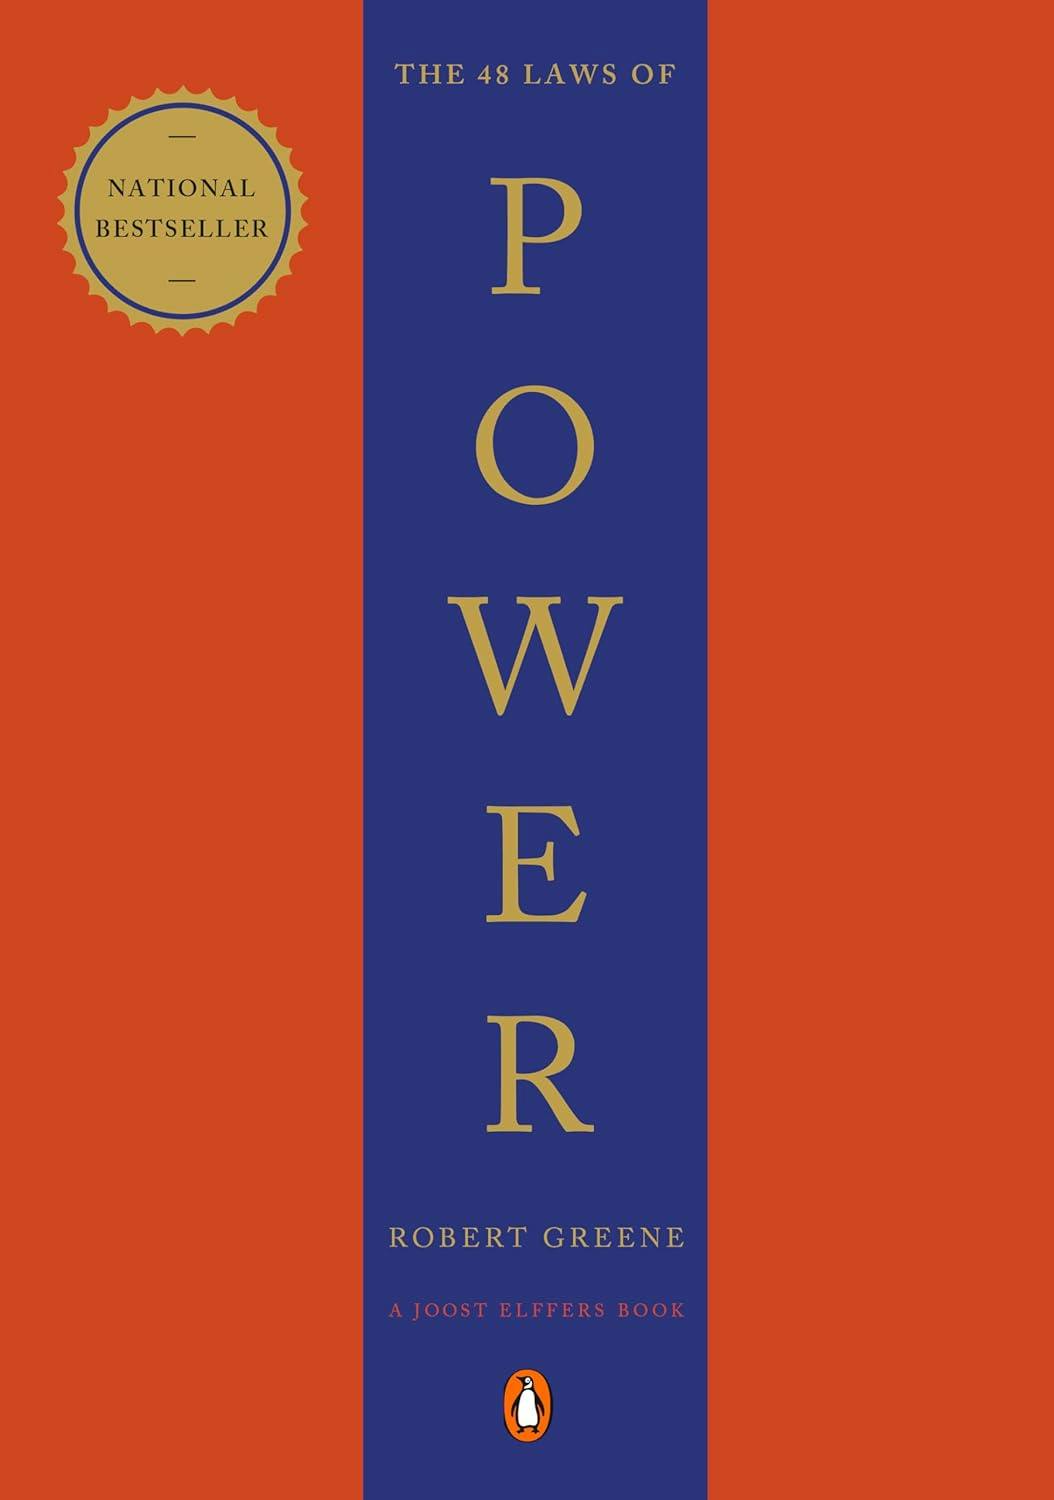 Book: 48 Laws of Power